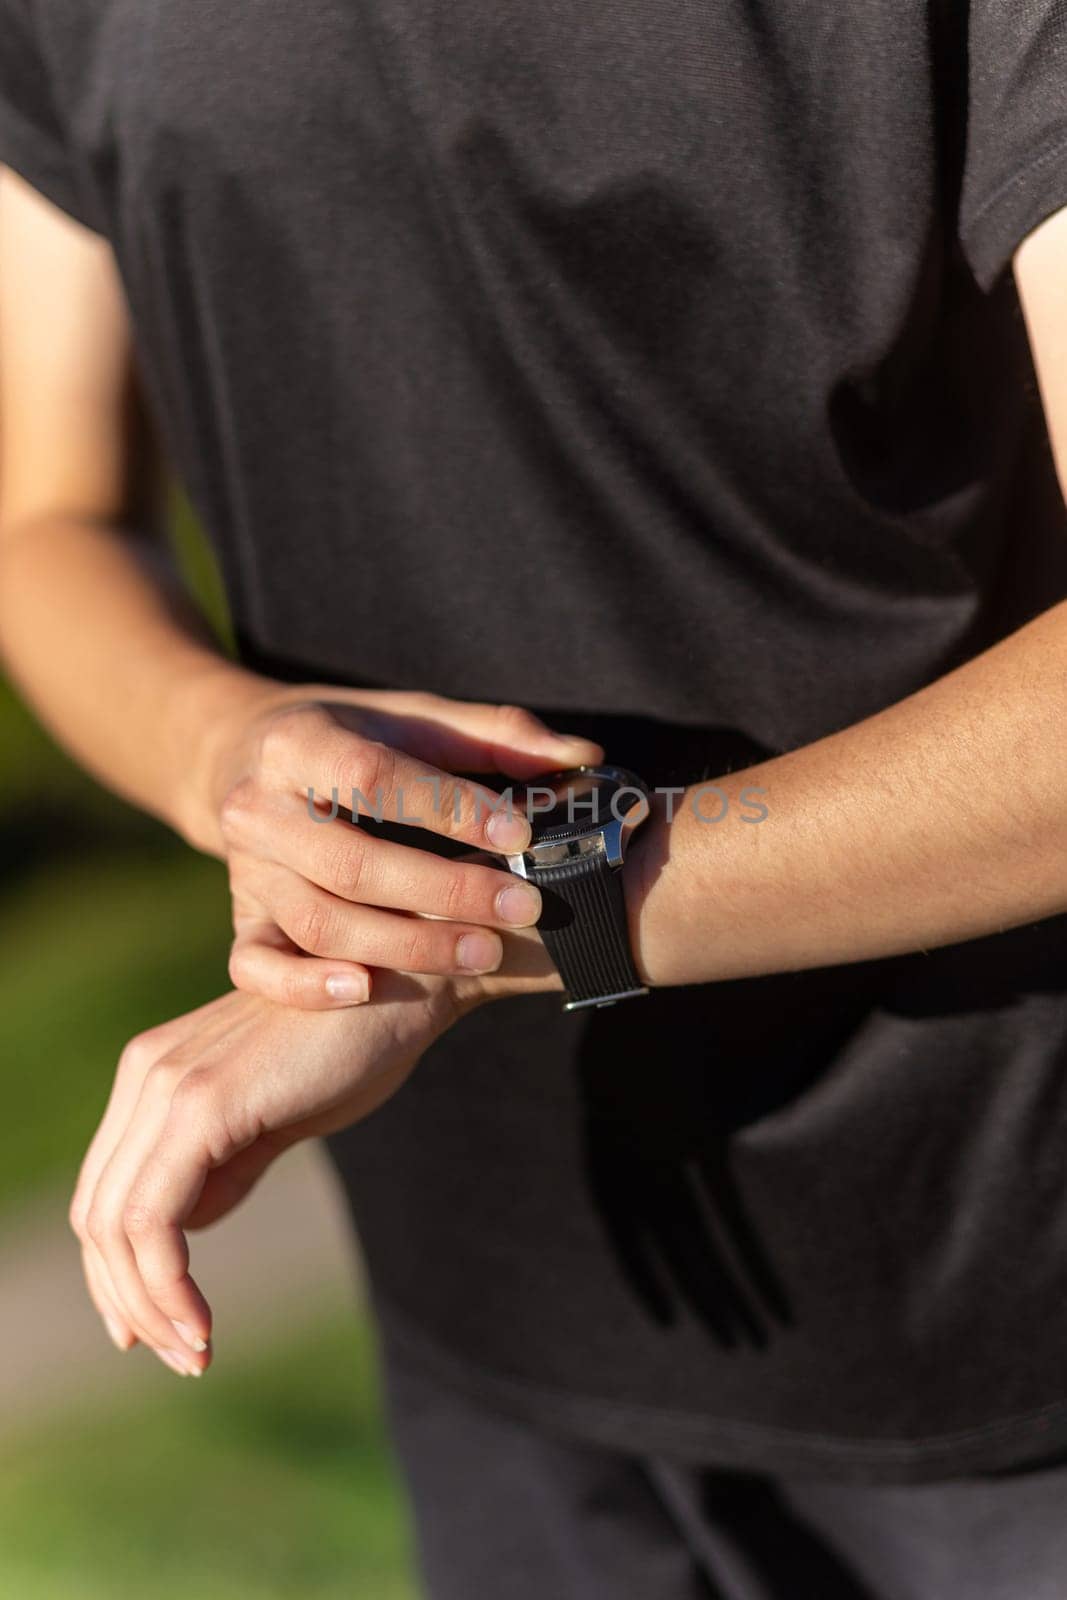 Teenage girl in black clothes checking her fitness watch after a workout. Tired runner girl controlling pulsations checking smartwatch.